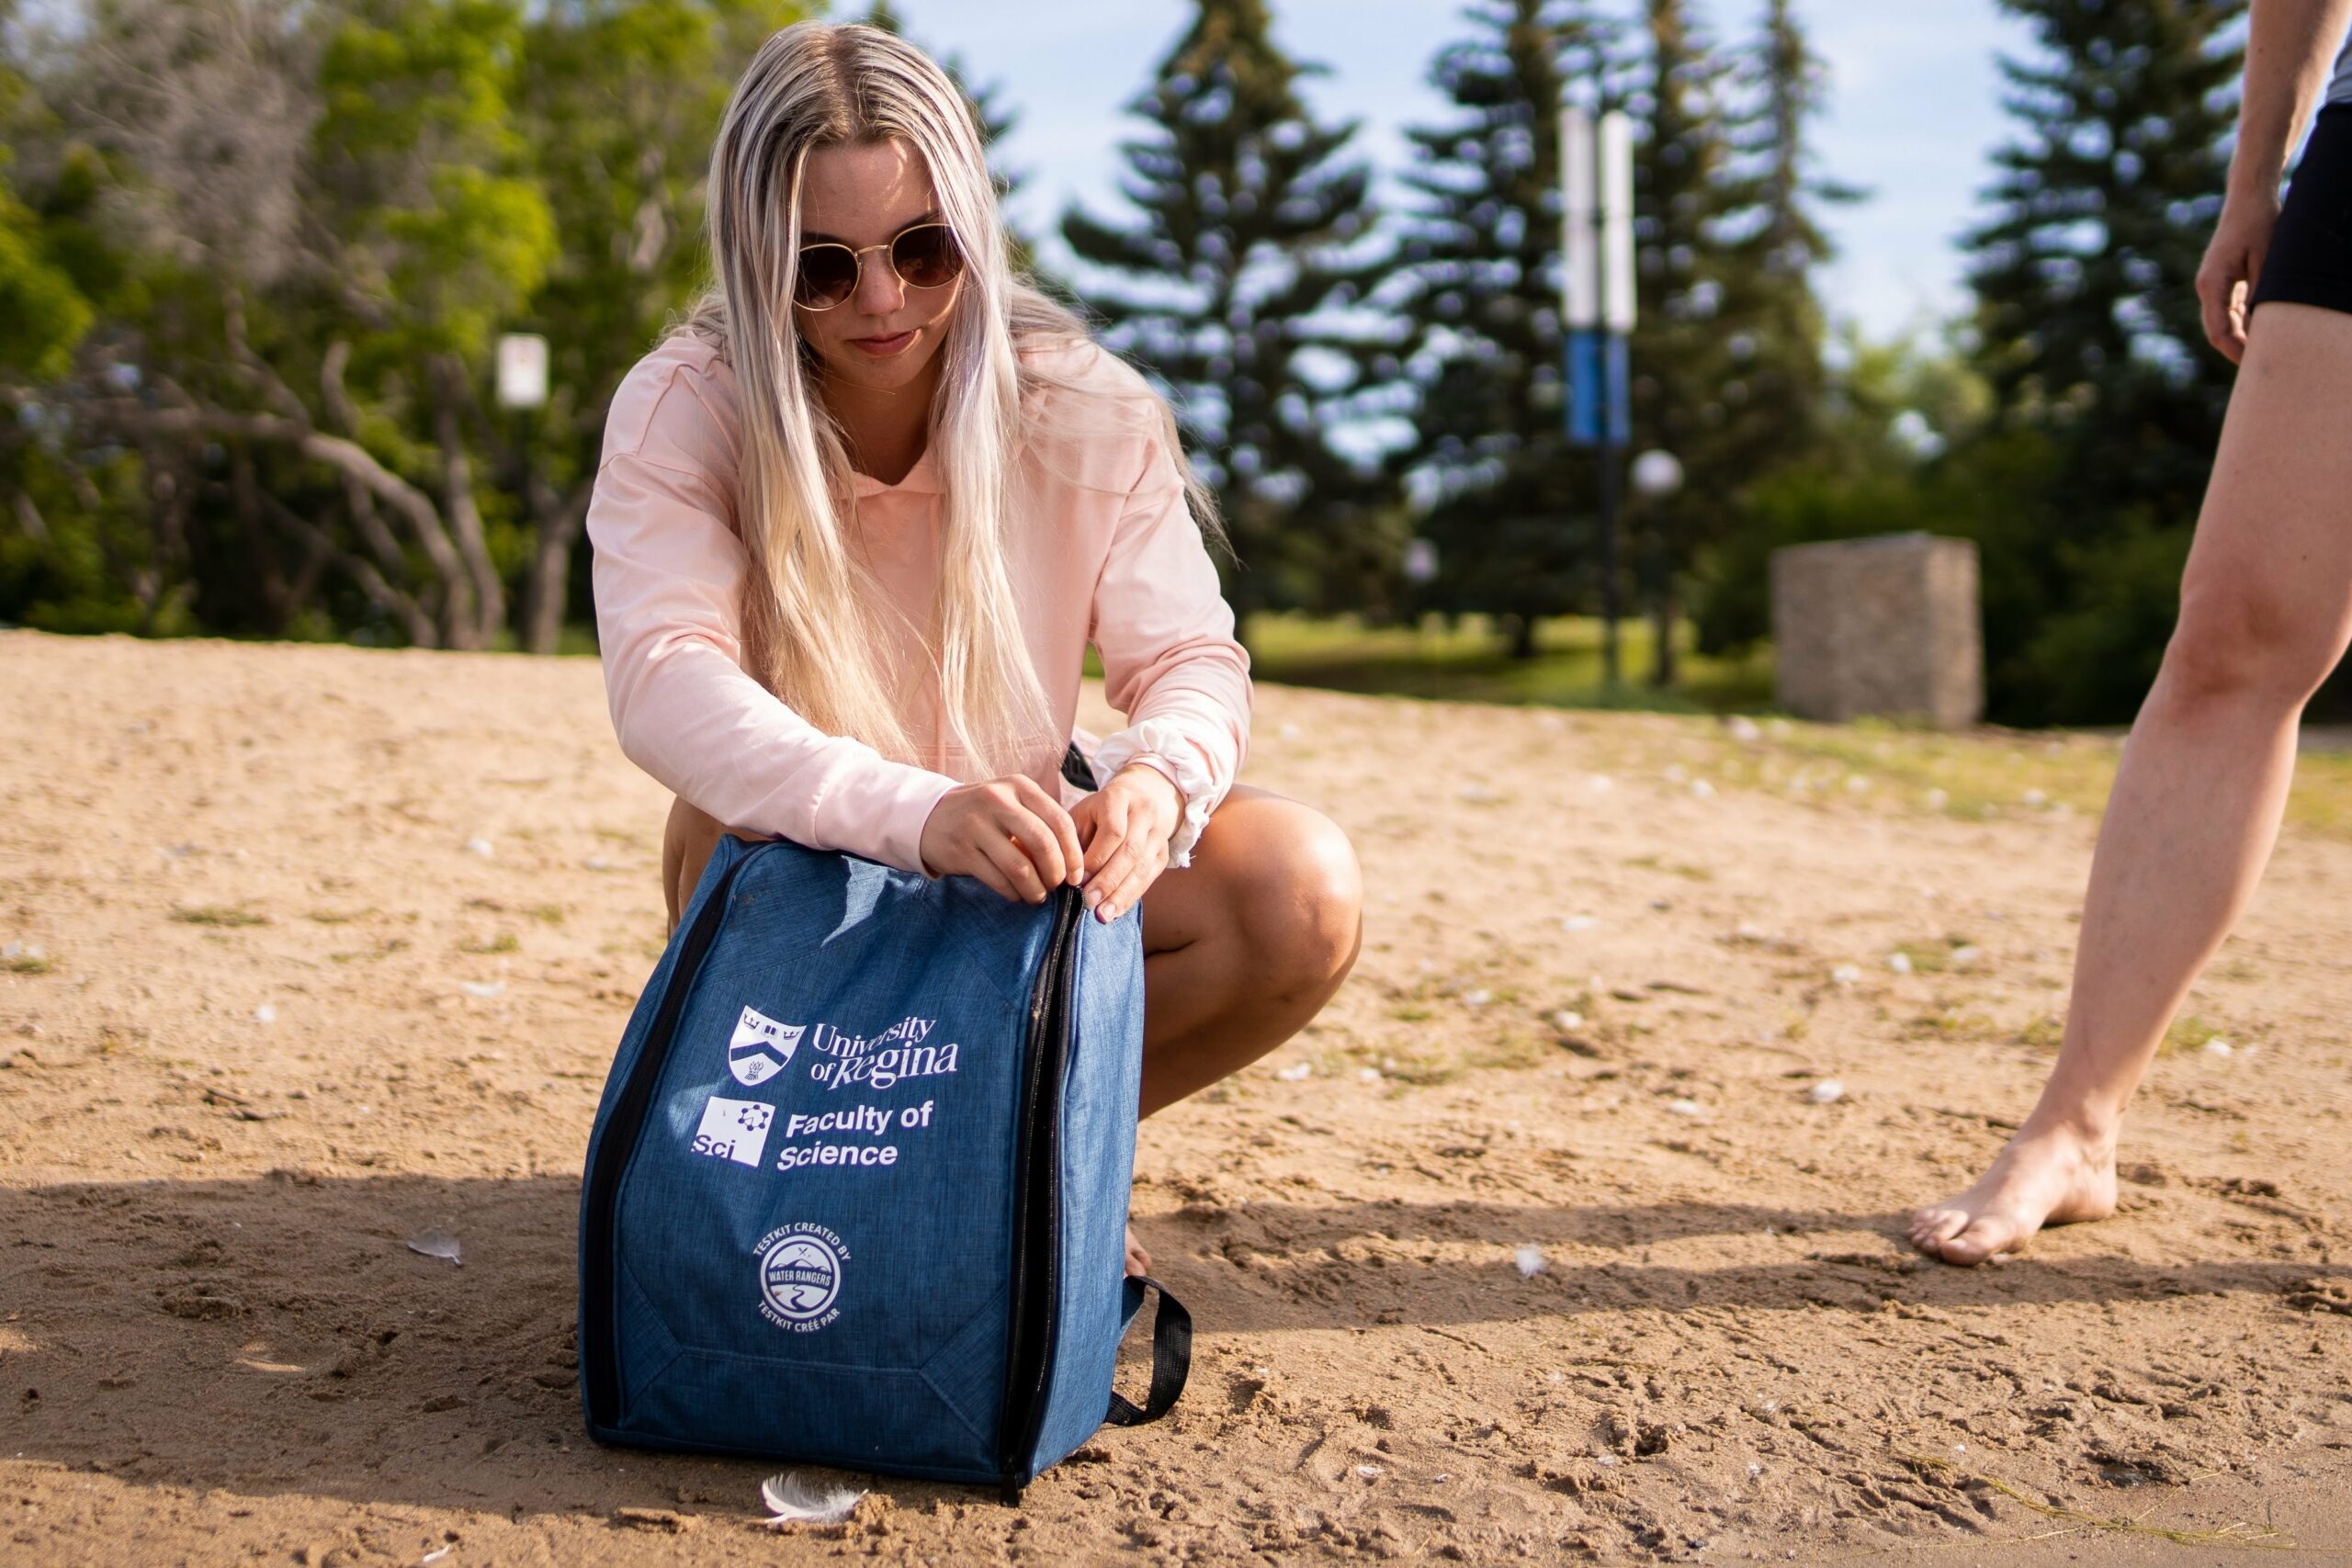 Woman with long blond hair and sunglasses unzipping a water testkit bag